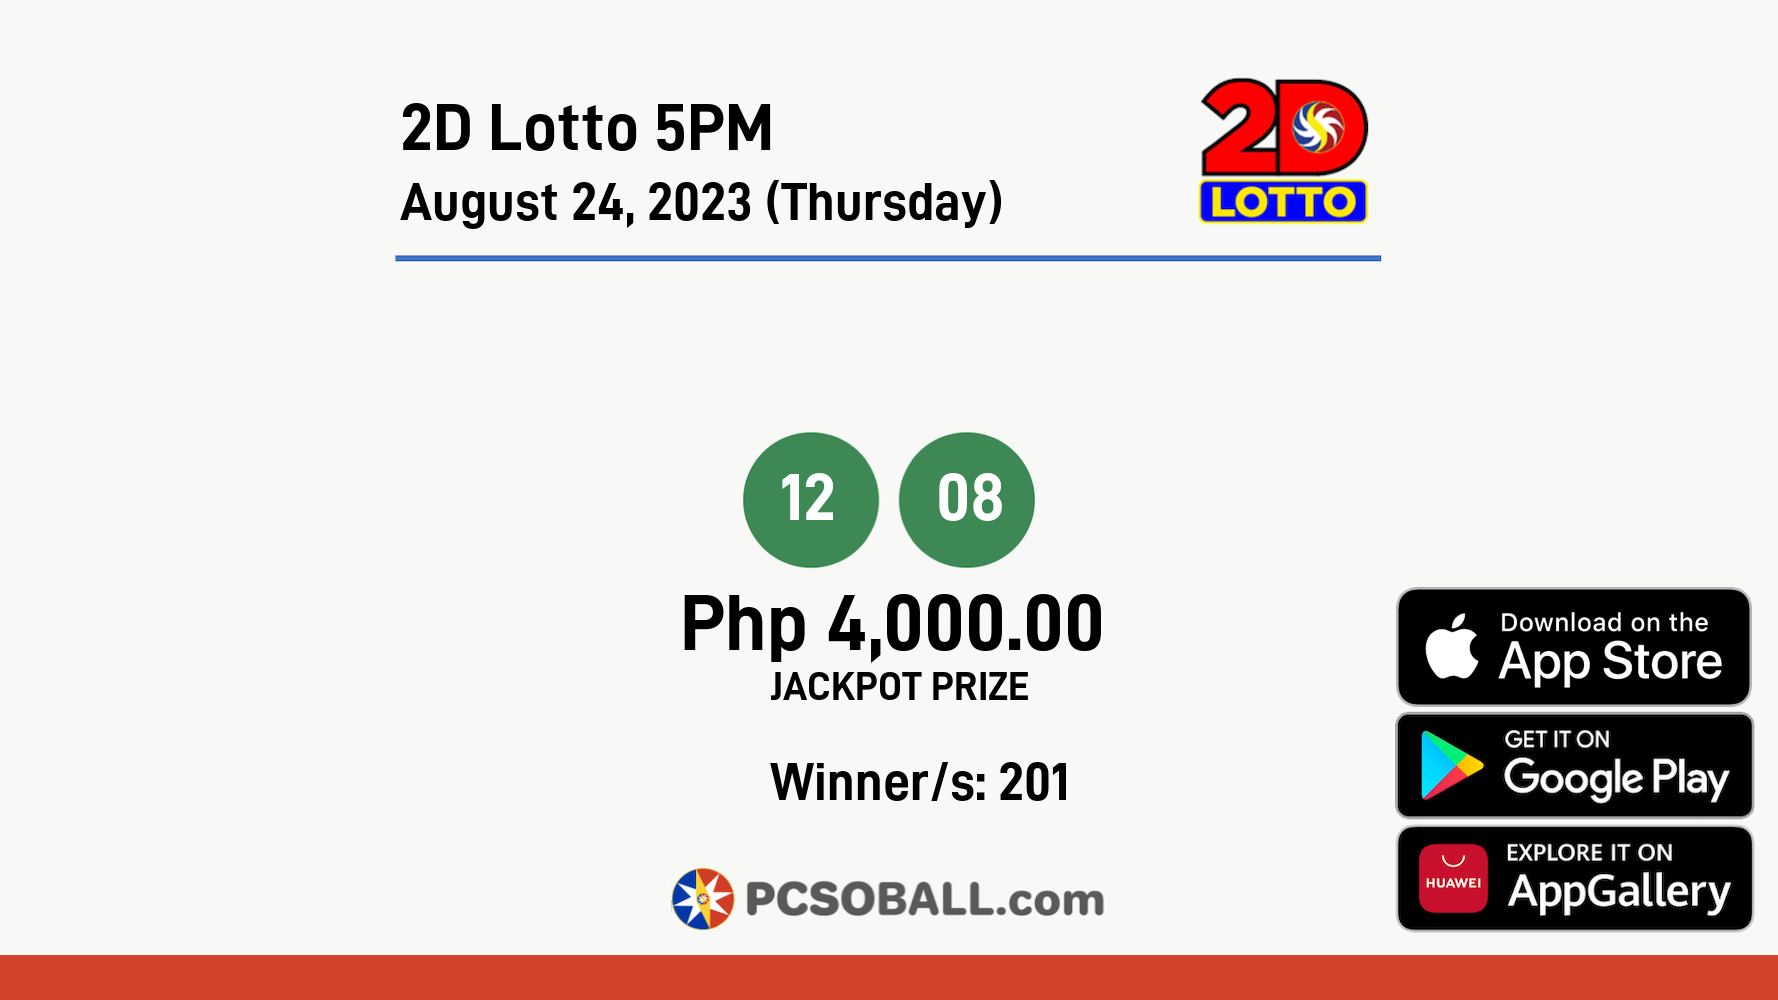 2D Lotto 5PM August 24, 2023 (Thursday) Result